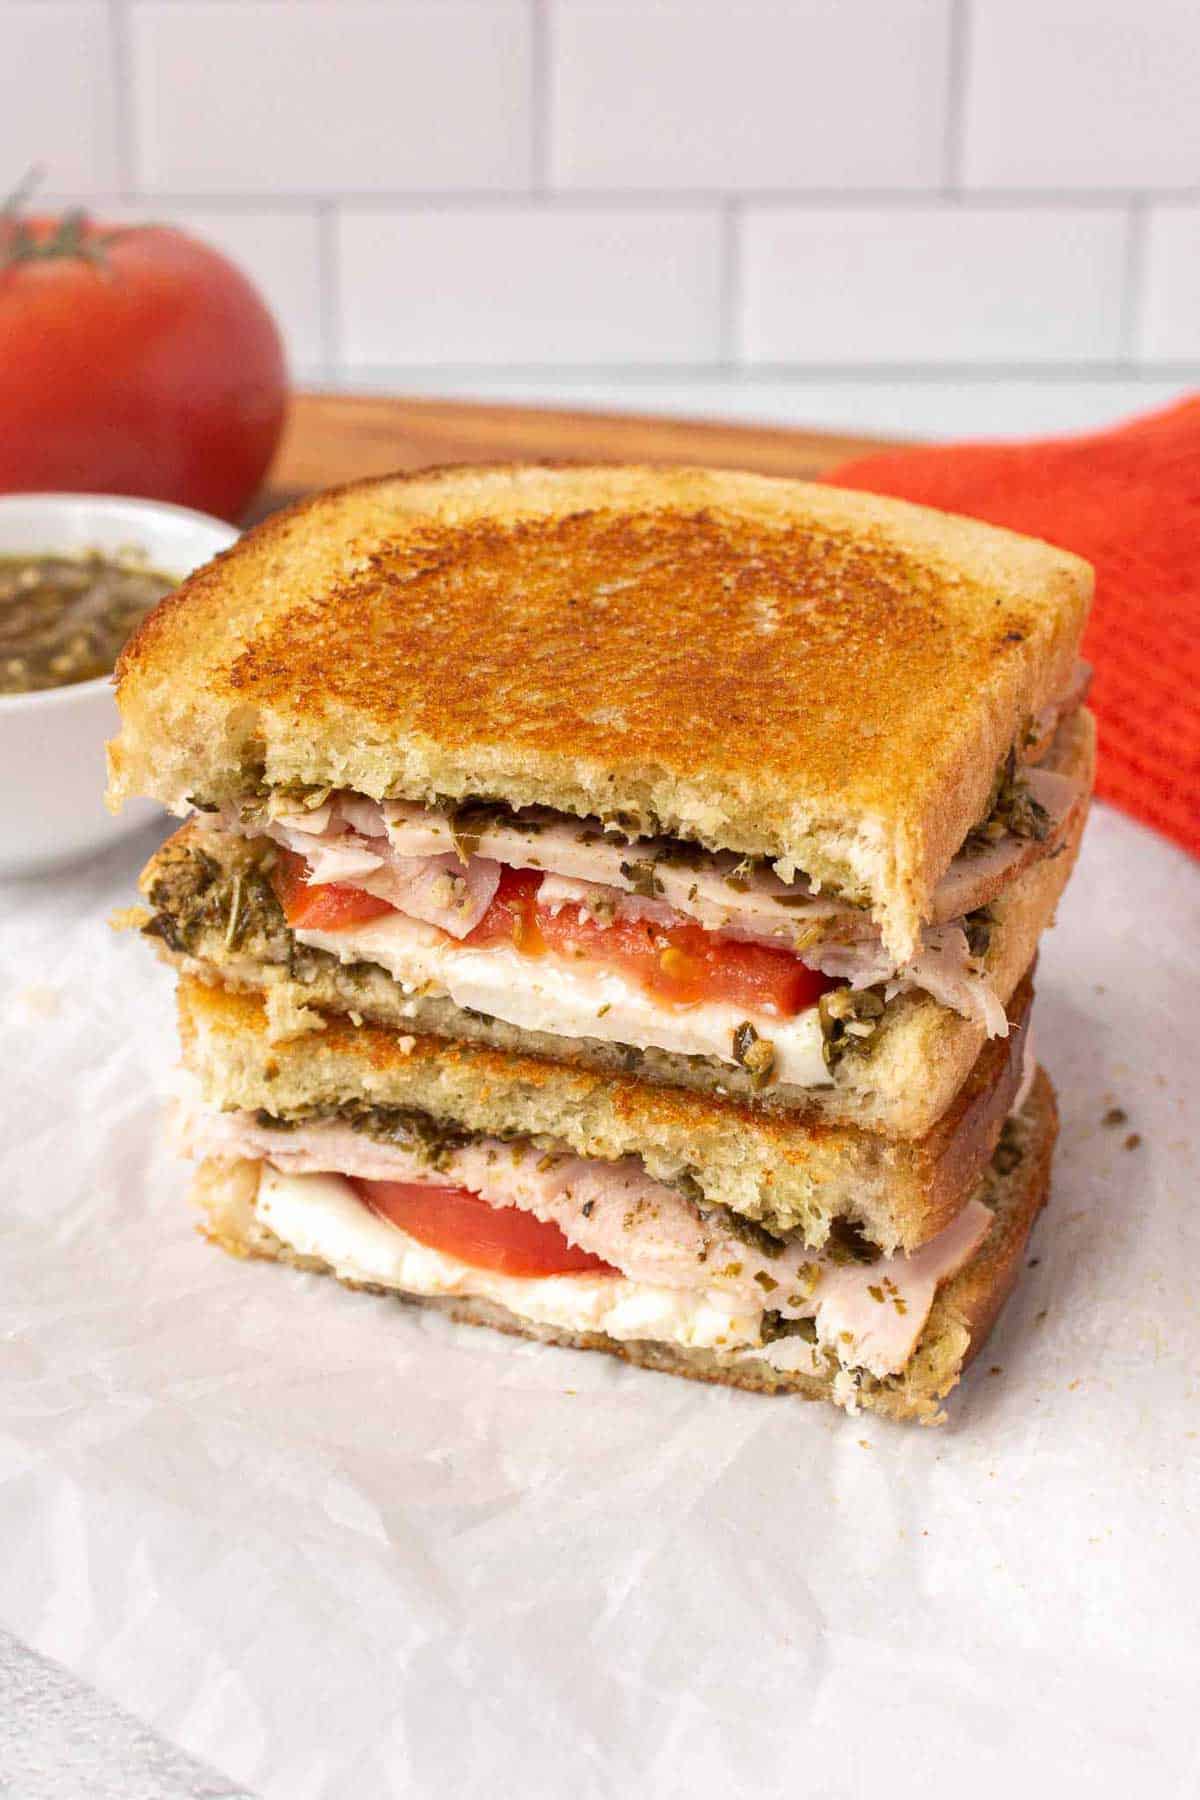 Pesto turkey sandwich cross section with pesto, fresh mozzarella slices, tomato, and thick turkey slices. The sandwich has been grilled and is golden on top.